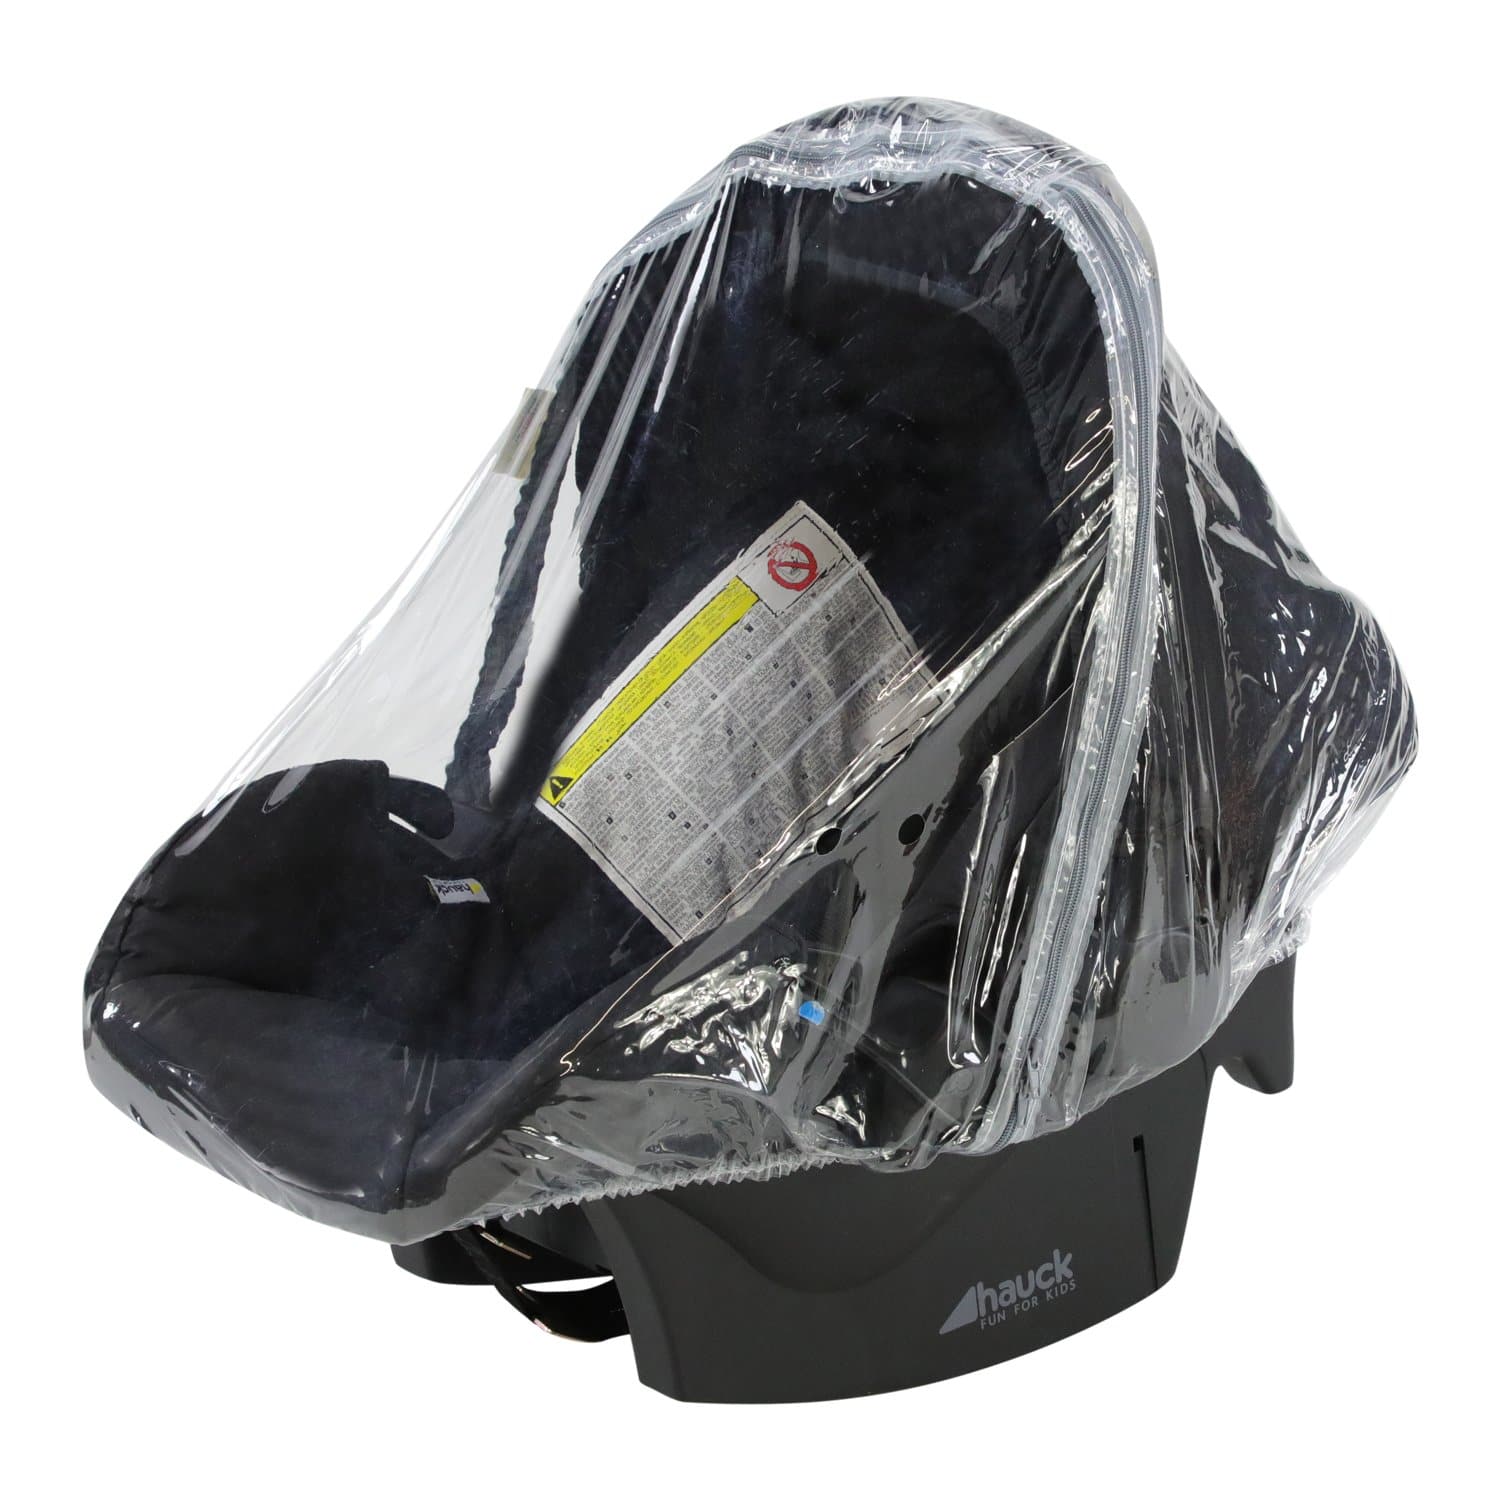 Universal Car Seat Raincover - Fits All Models - For Your Little One